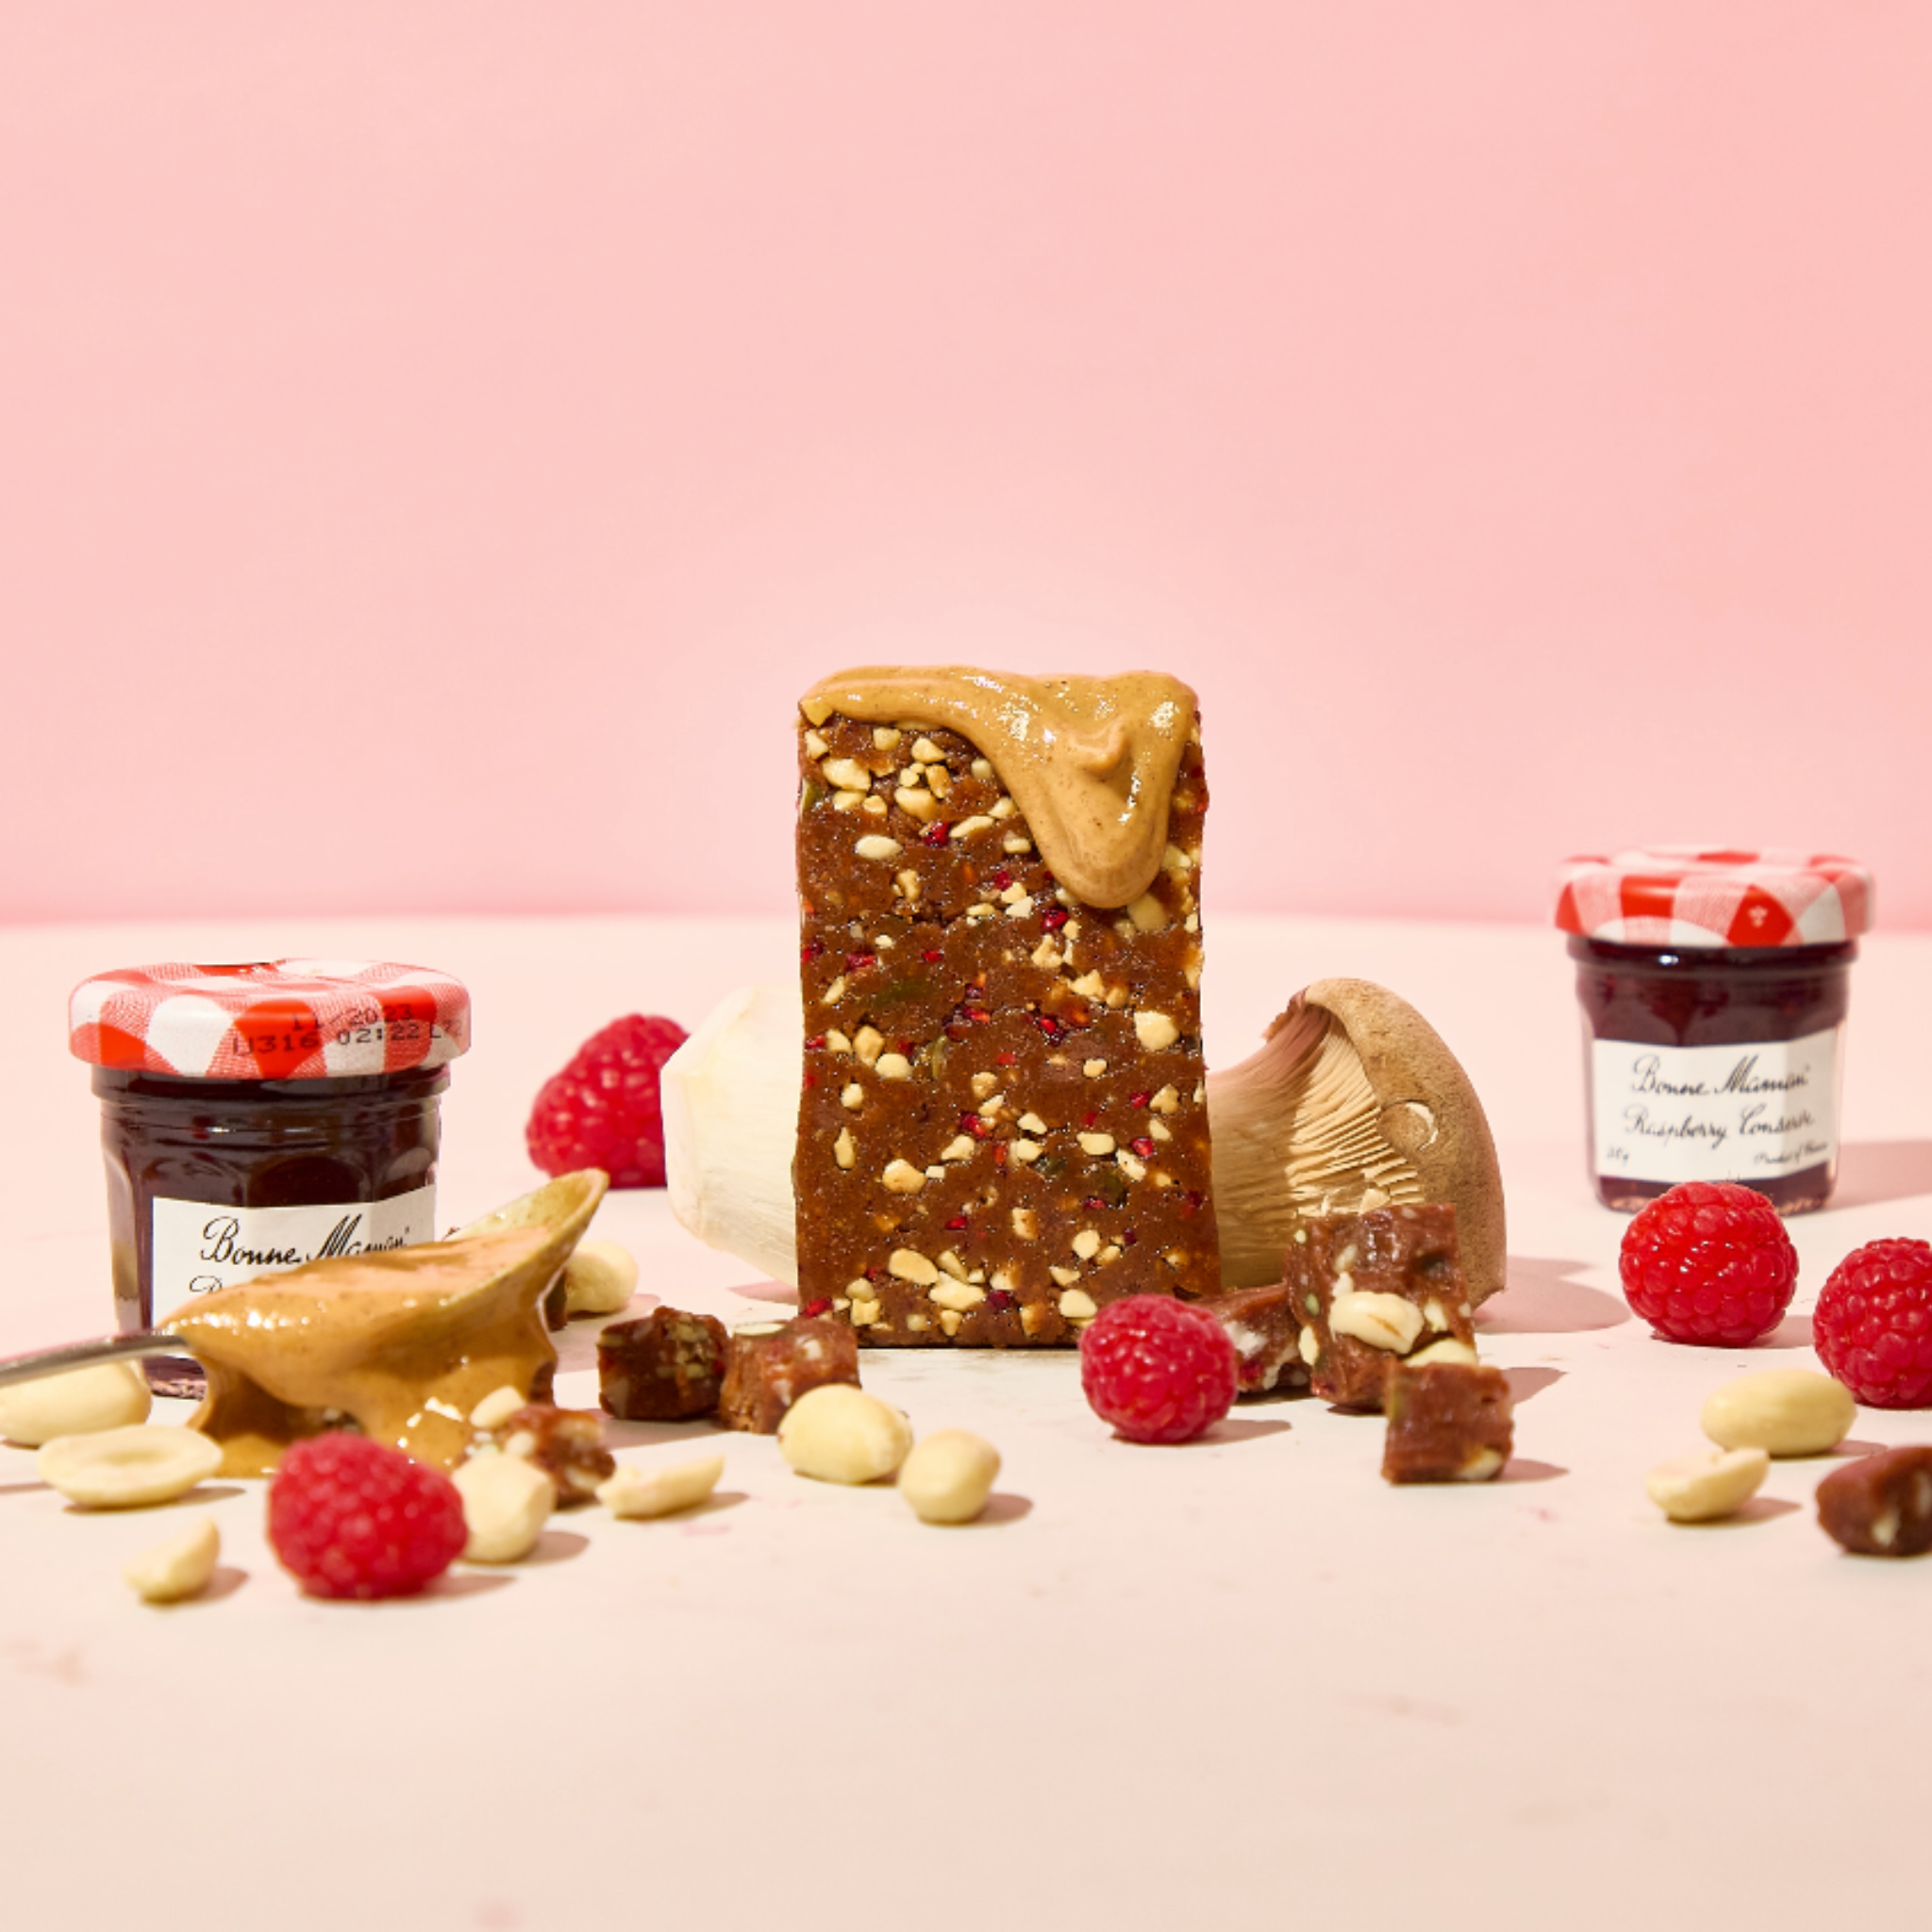 A Lucid Peanut Butter and Jelly bar with peanut butter and raspberries, alongside nuts, chocolate, mushrooms and two Bonne Maman jam jars, against a pink background.